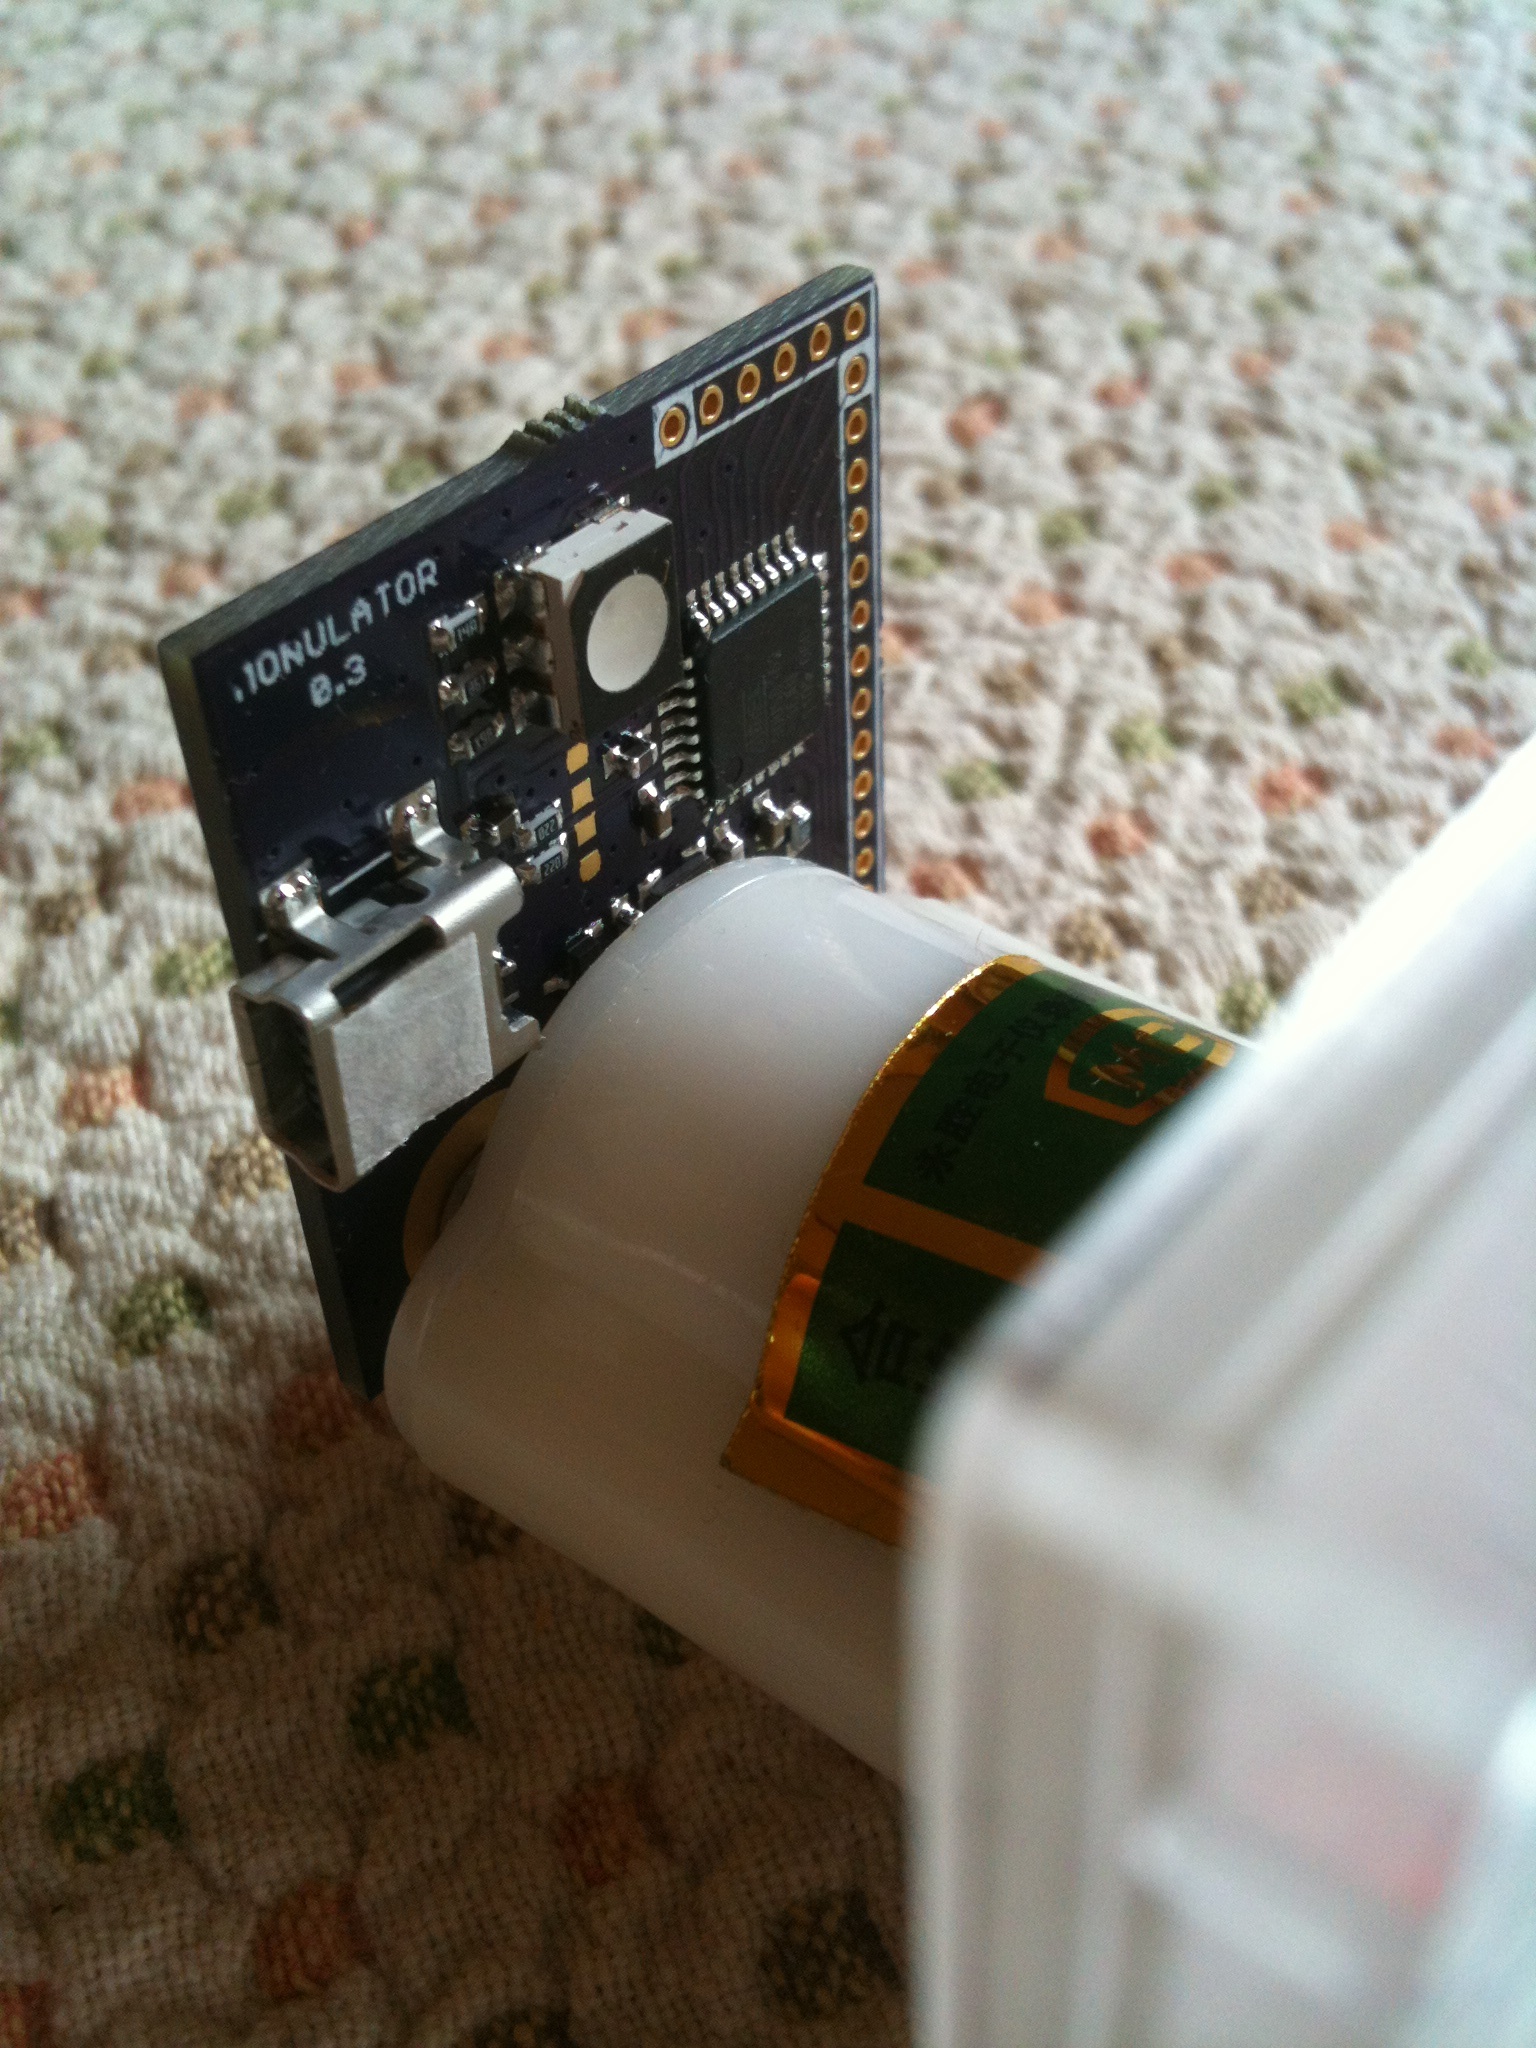 Inside The Monulator, a USB-controlled analog panel meter with RGB backlight